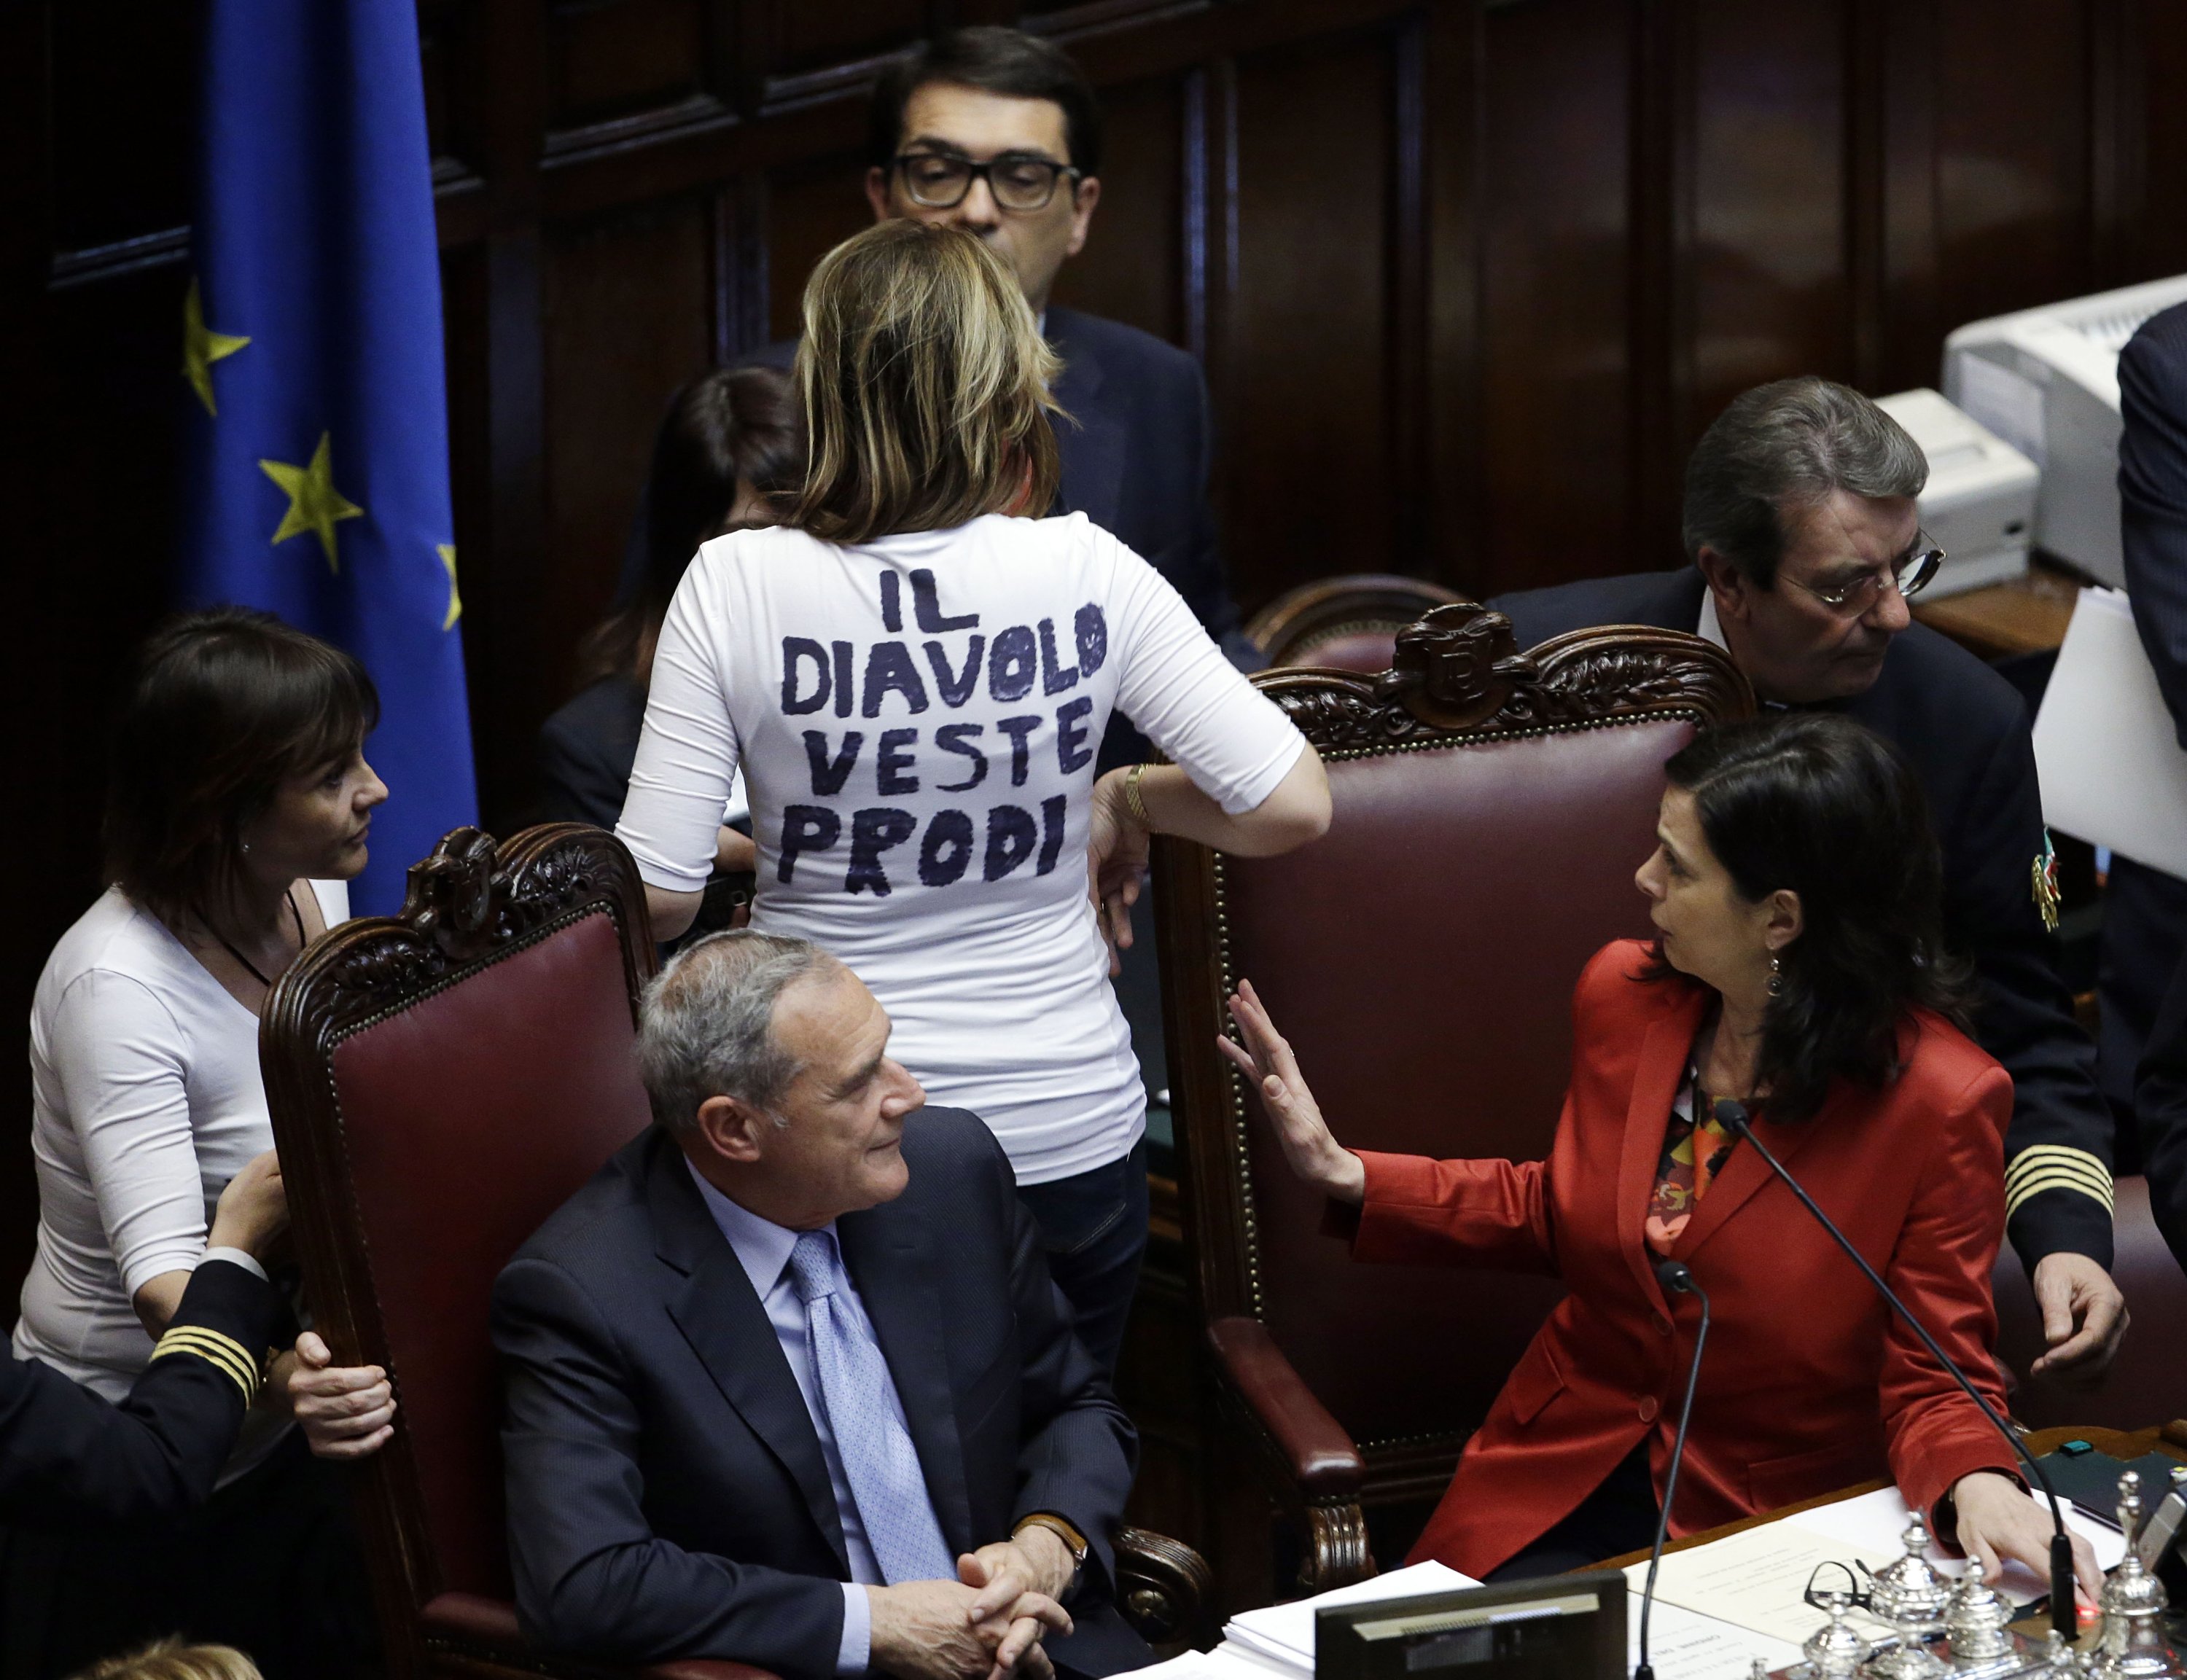 Senator Alessandra Mussolini (top C) shows a T-shirt that reads "The Devil wears Prodi" to Senate President Pietro Grasso (L) and Lower Chamber President Laura Boldrini during the fourth round of voting to elect a new president, in Rome, April 19, 2013. (AP Photo)